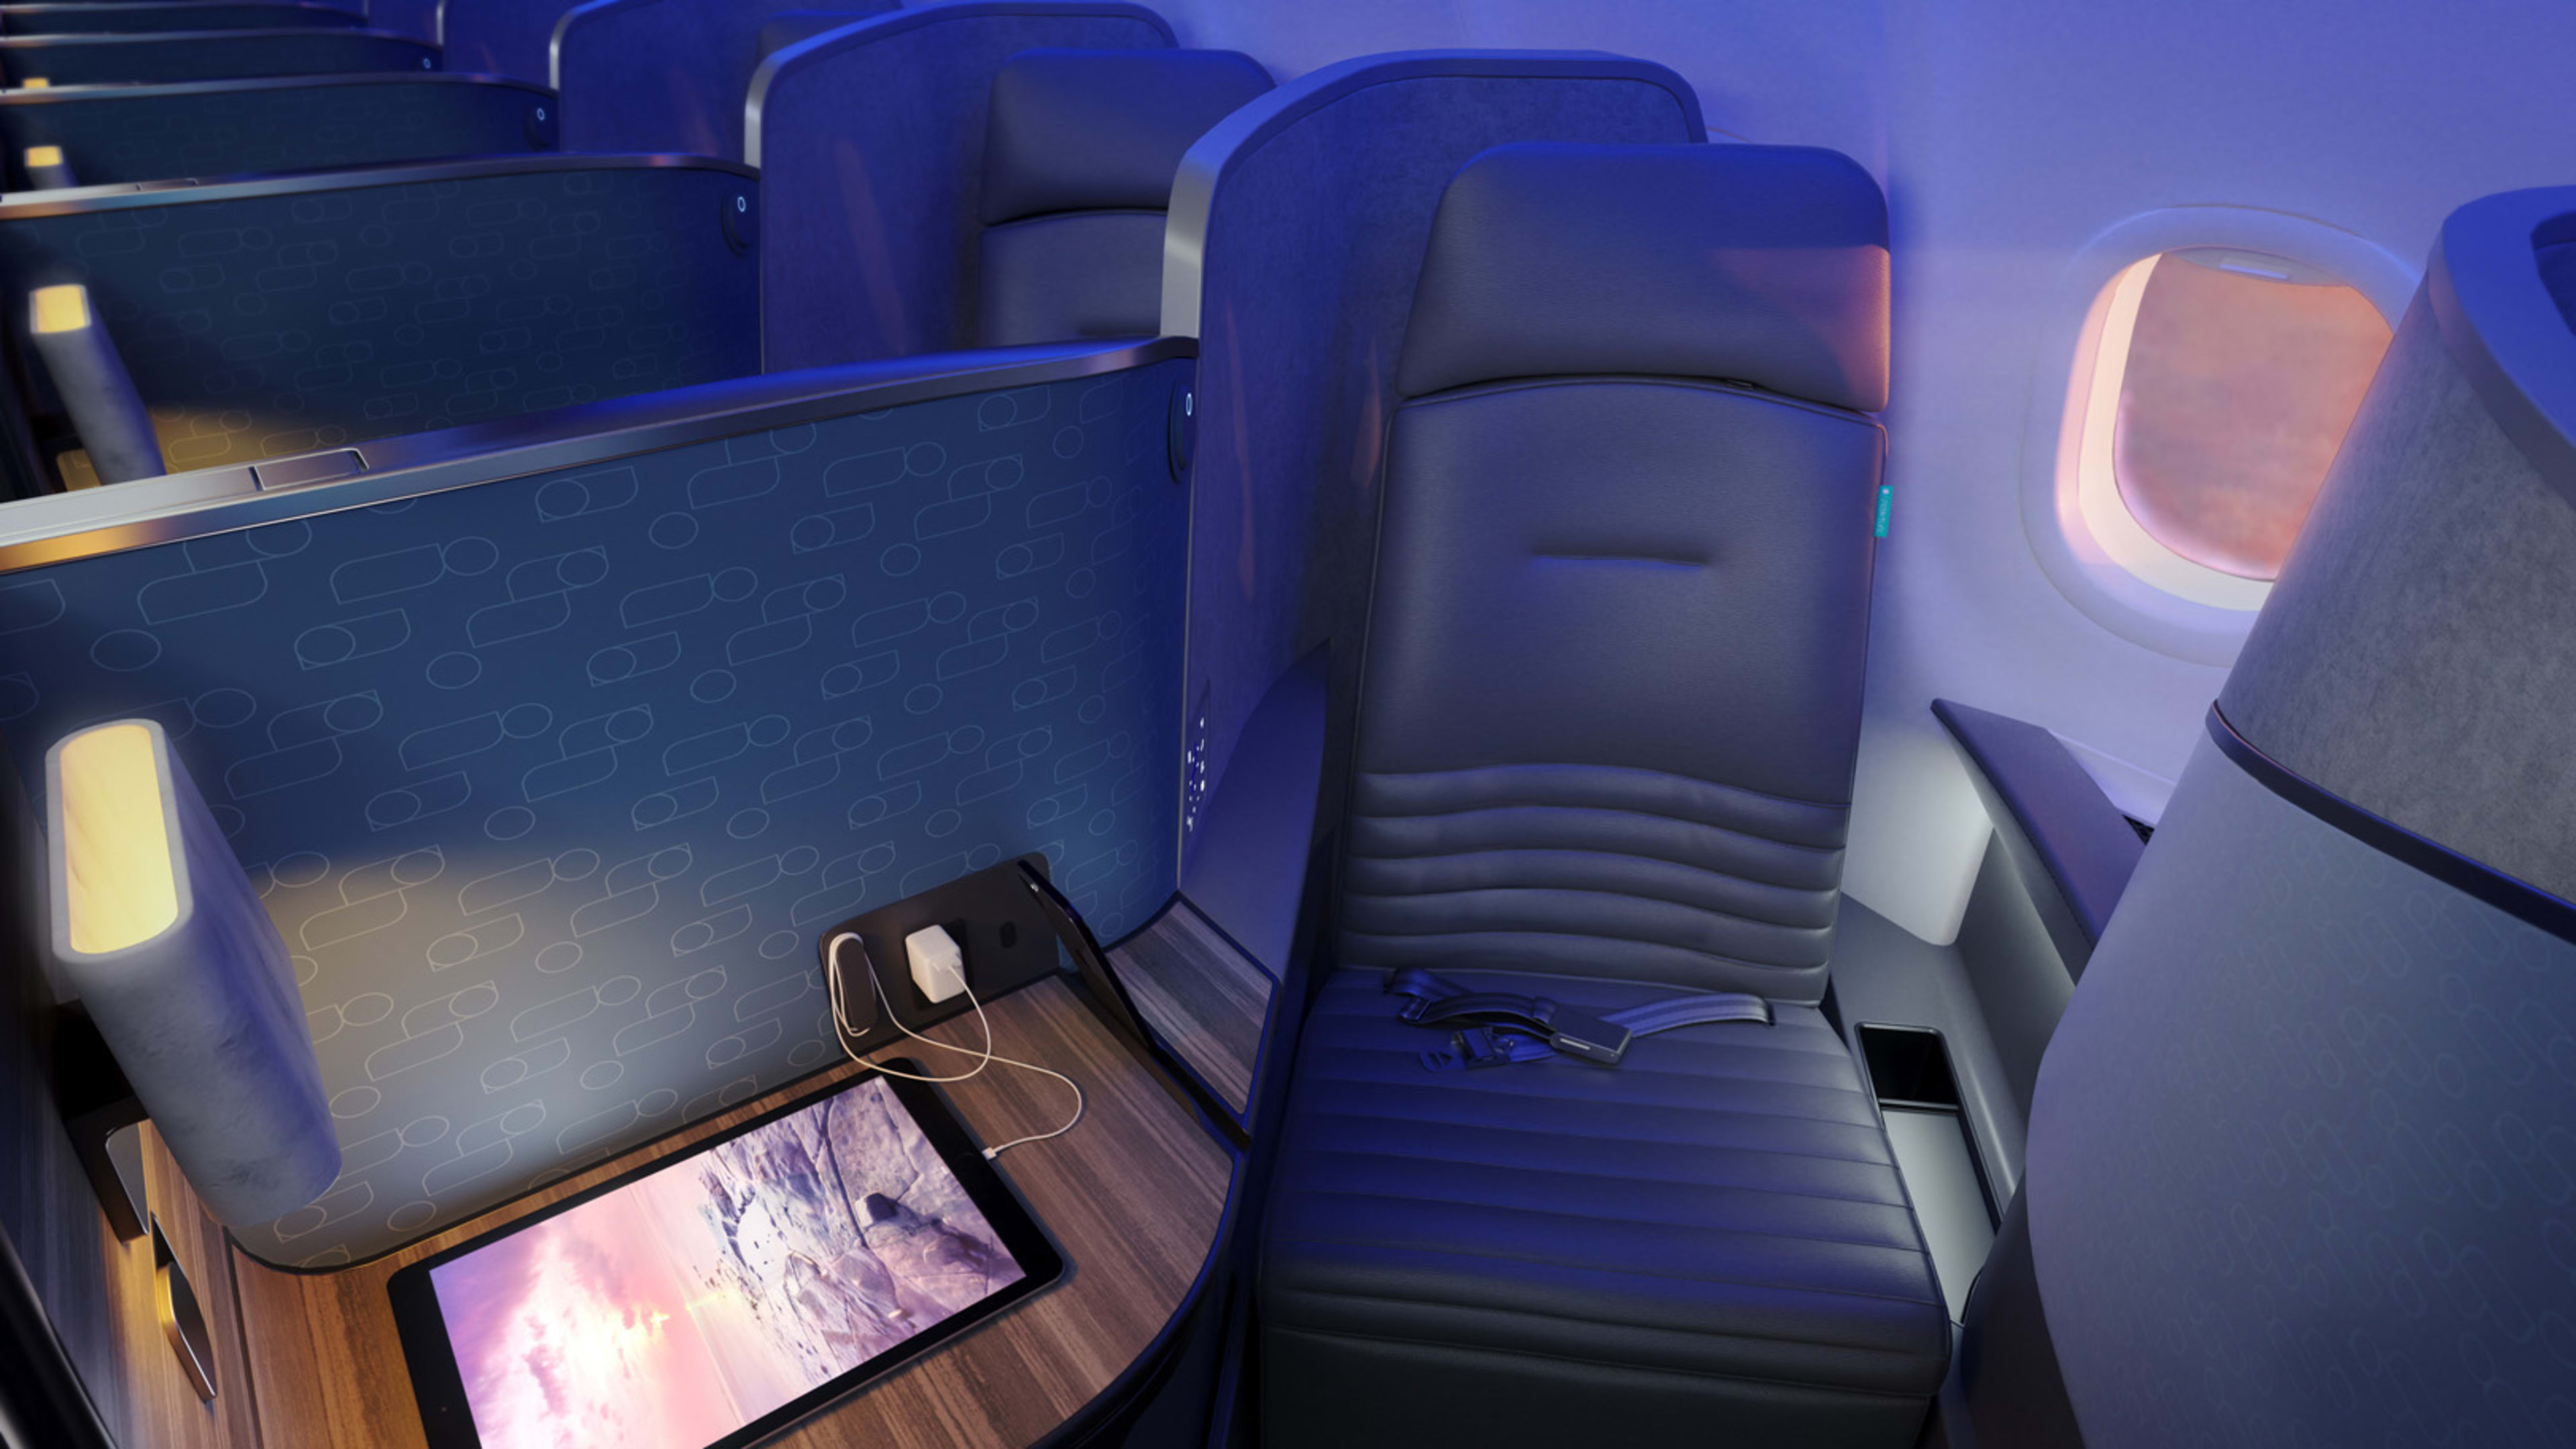 JetBlue’s new seats are like mattresses for your butt